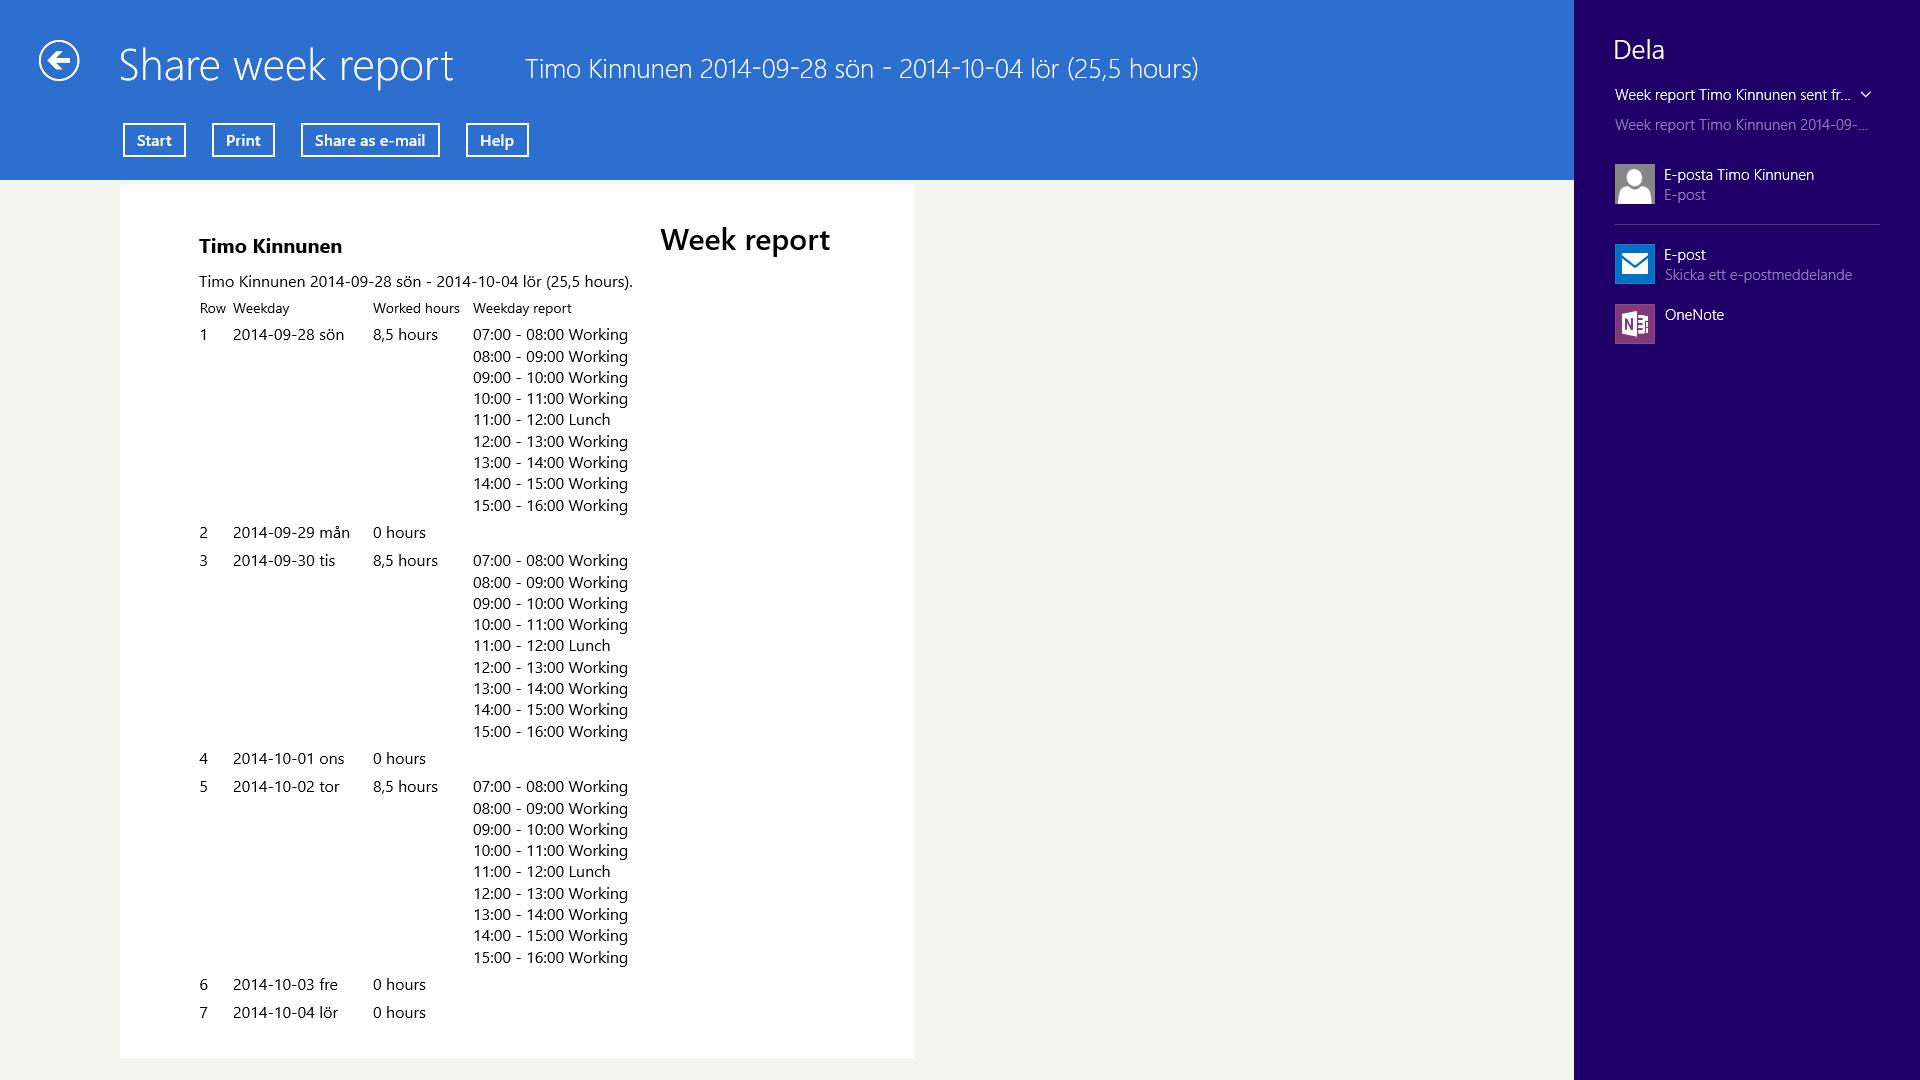 Share week report as e-mail using Windows E-Mail.